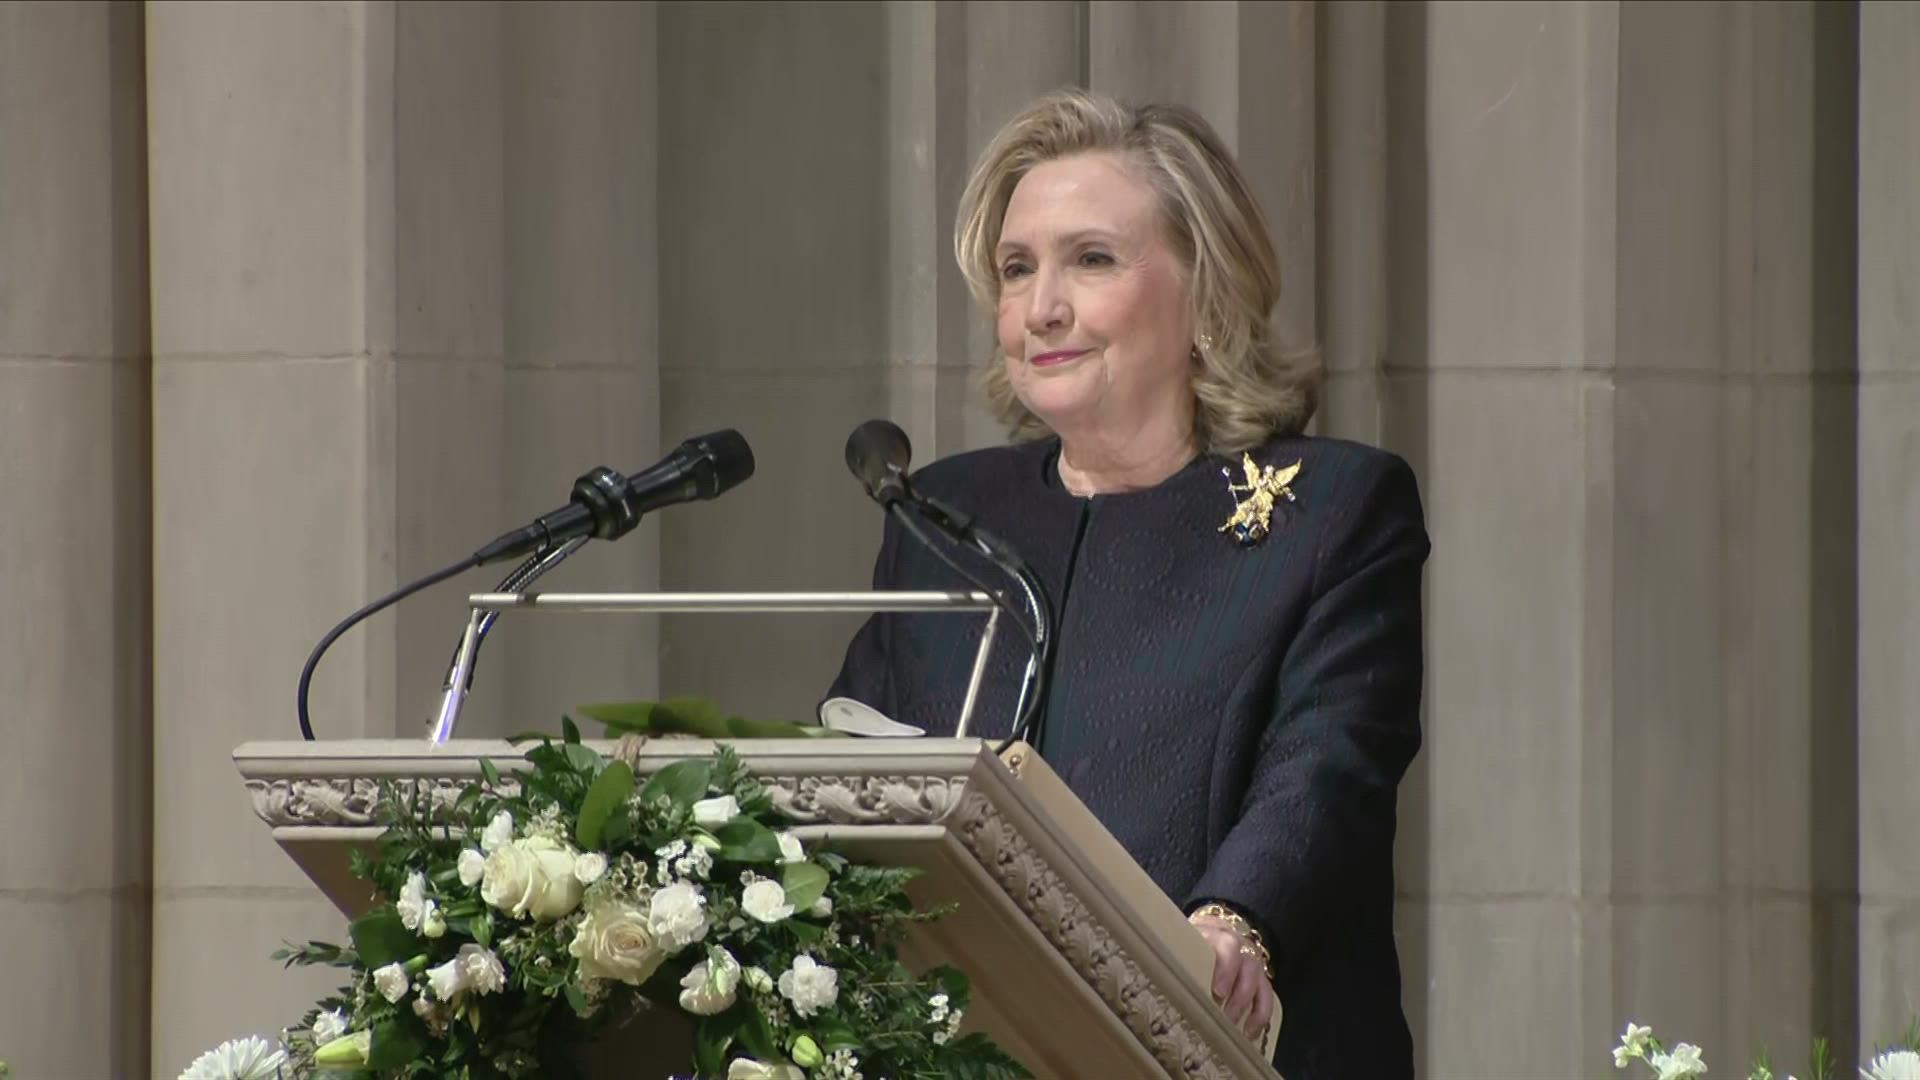 Former Secretary of State Hillary Clinton recalled some of the more lighthearted moments of Madeleine Albright's career and legacy.